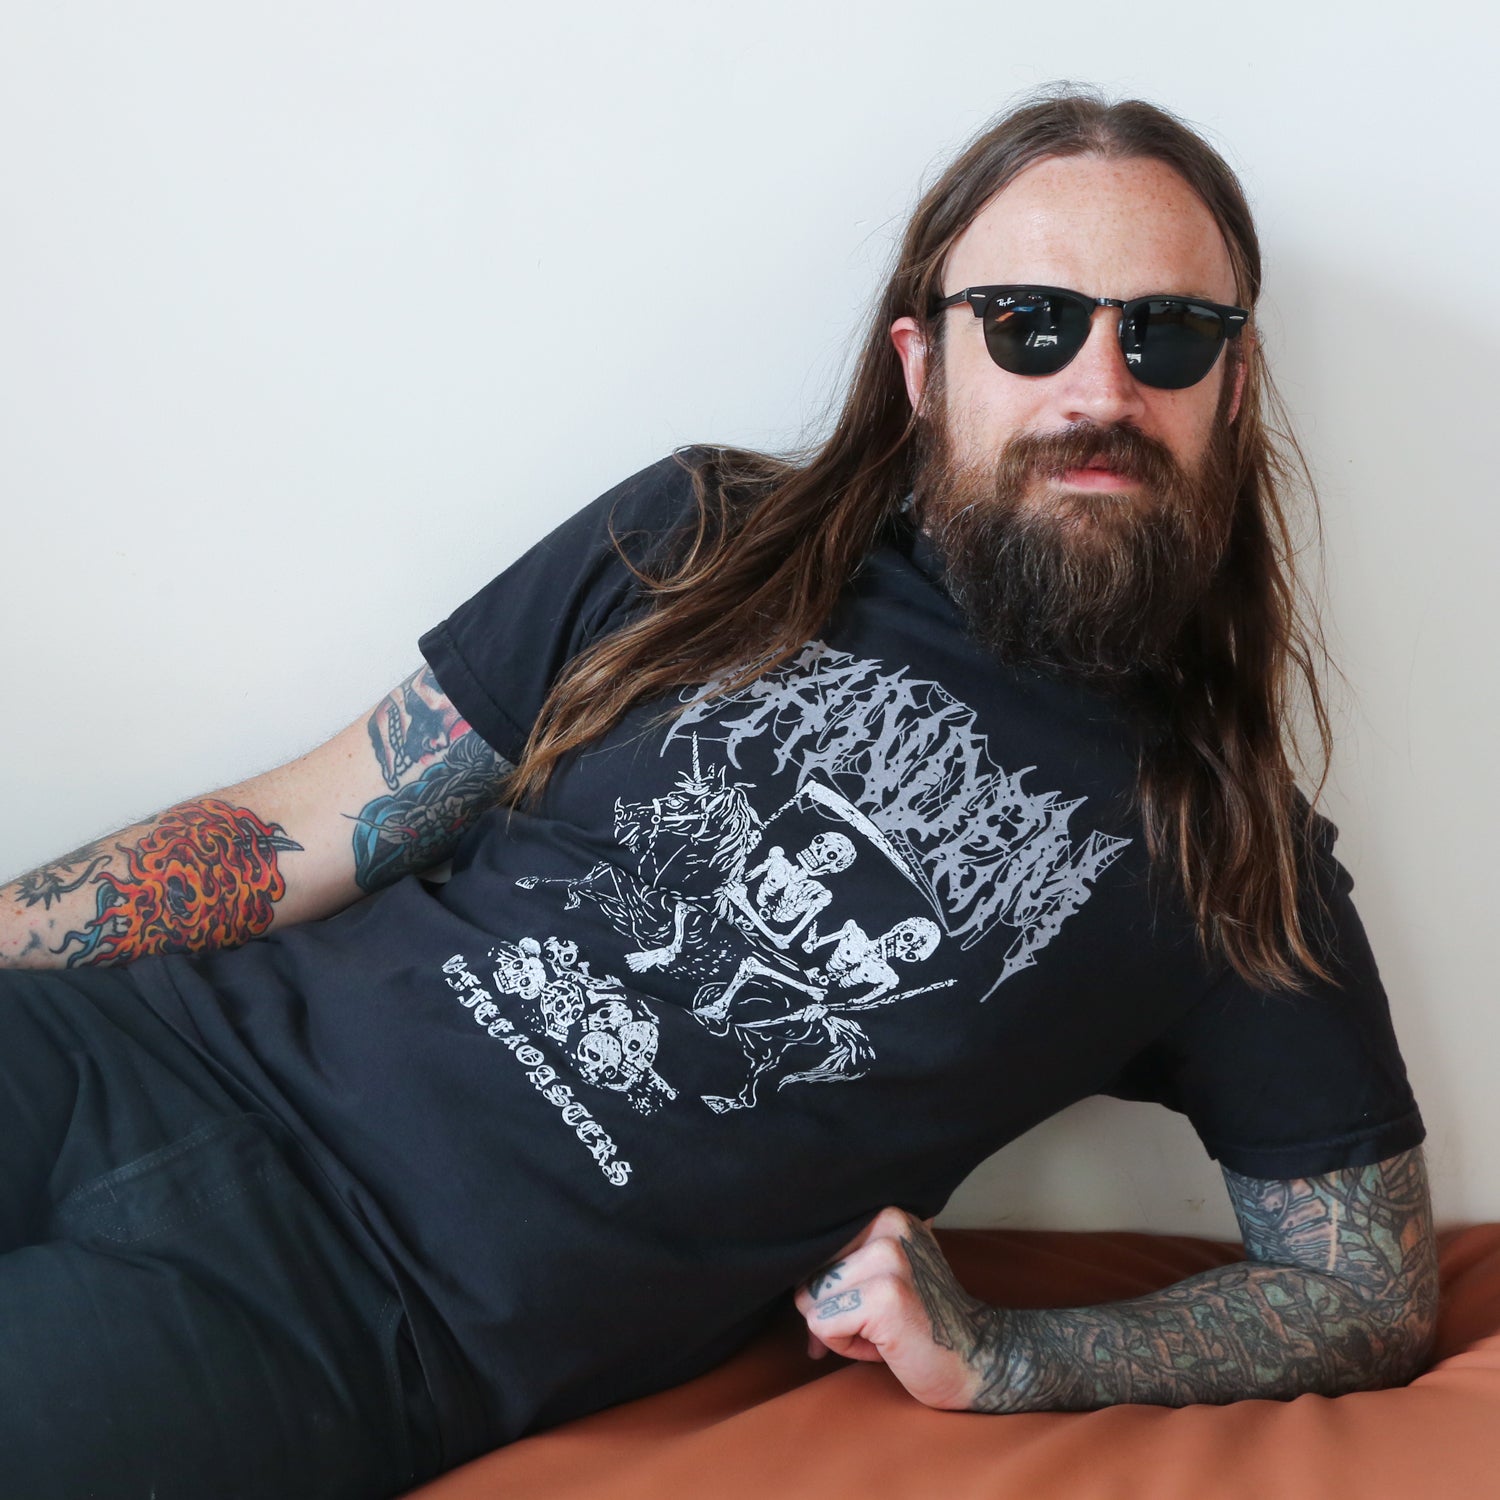 A man with long hair and a beard, wearing sunglasses and a Tandem Metal Tee from Tandem Coffee Roasters with graphic print, reclines on a beige sofa. His arms, featuring colorful tattoos including a prominent gold star tattoo.